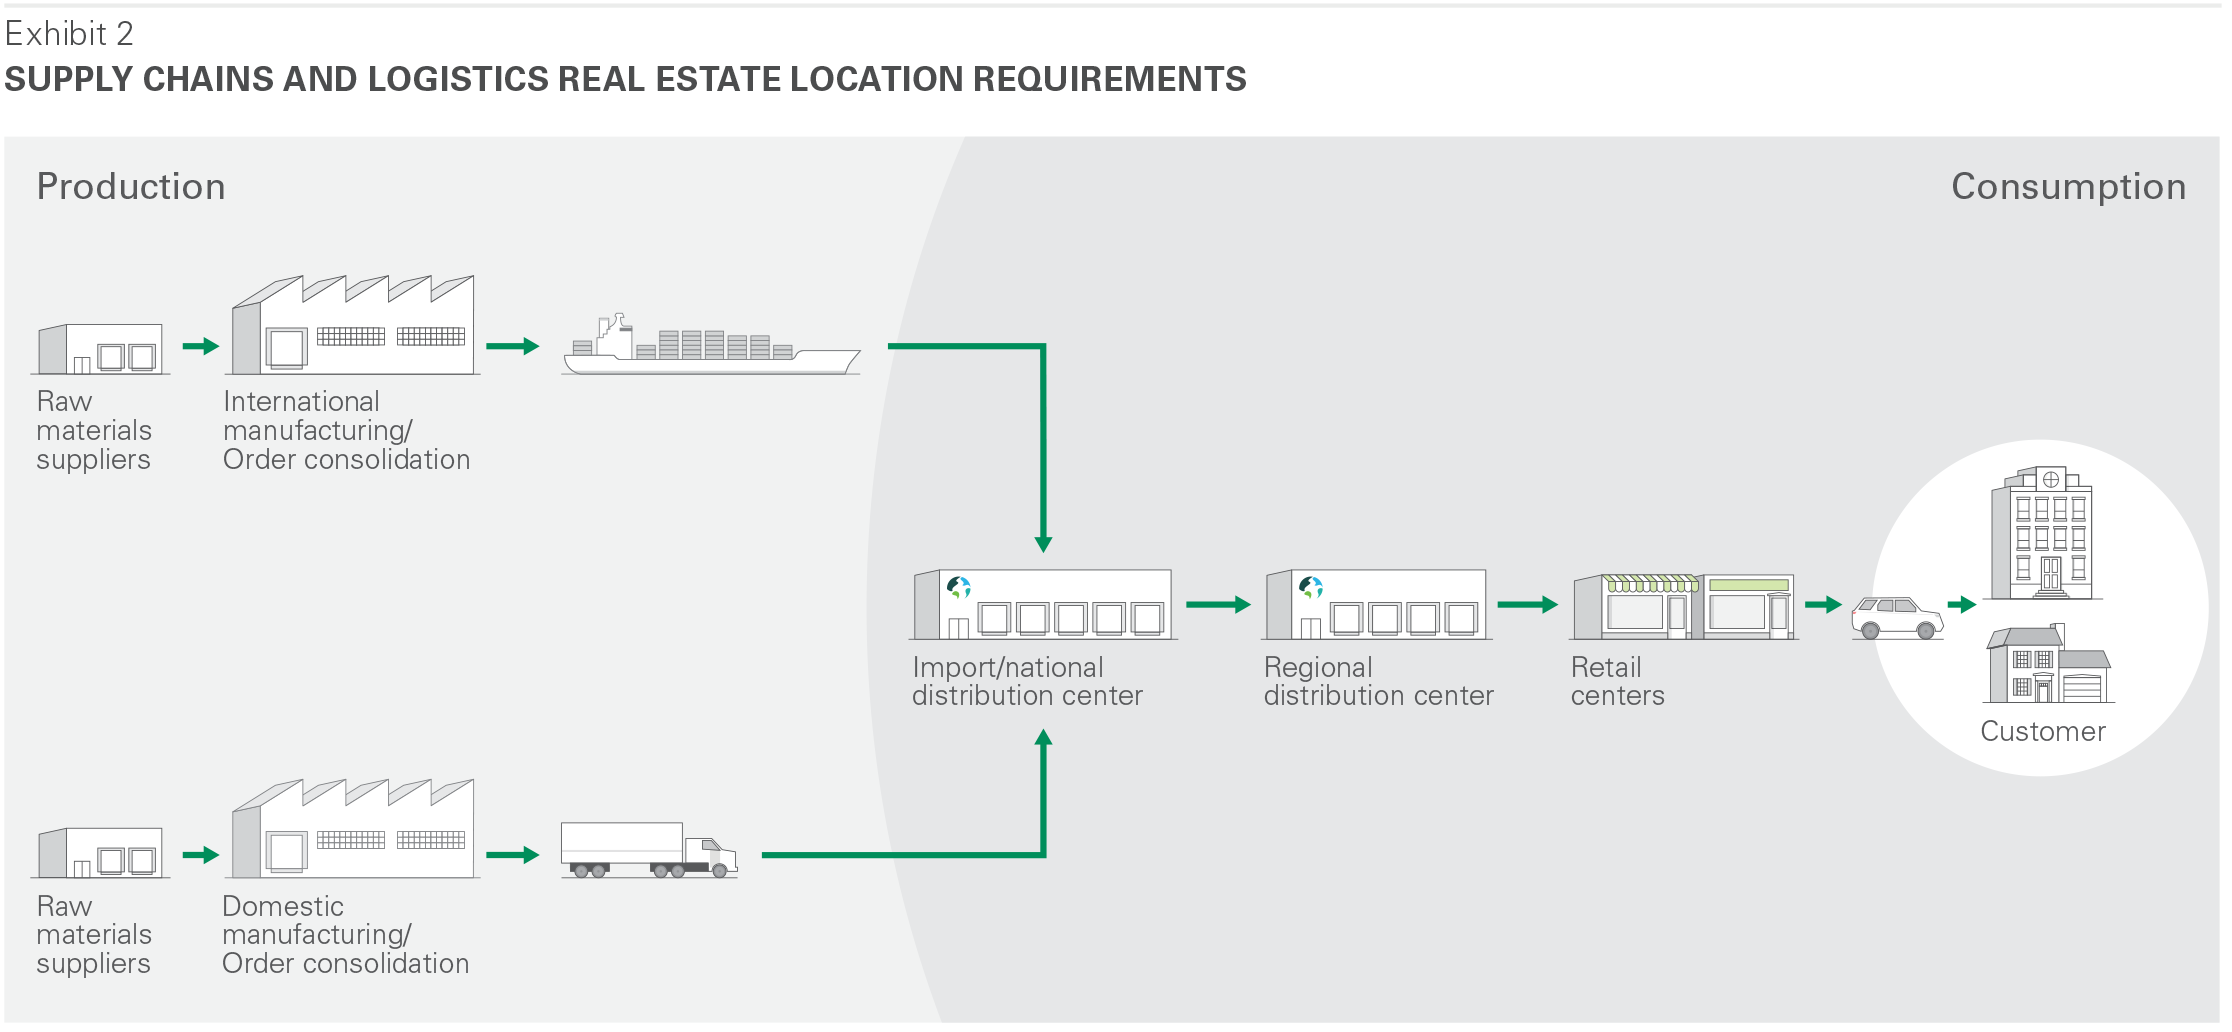 Supply Chains and Logistics Real Estate Location Requirements